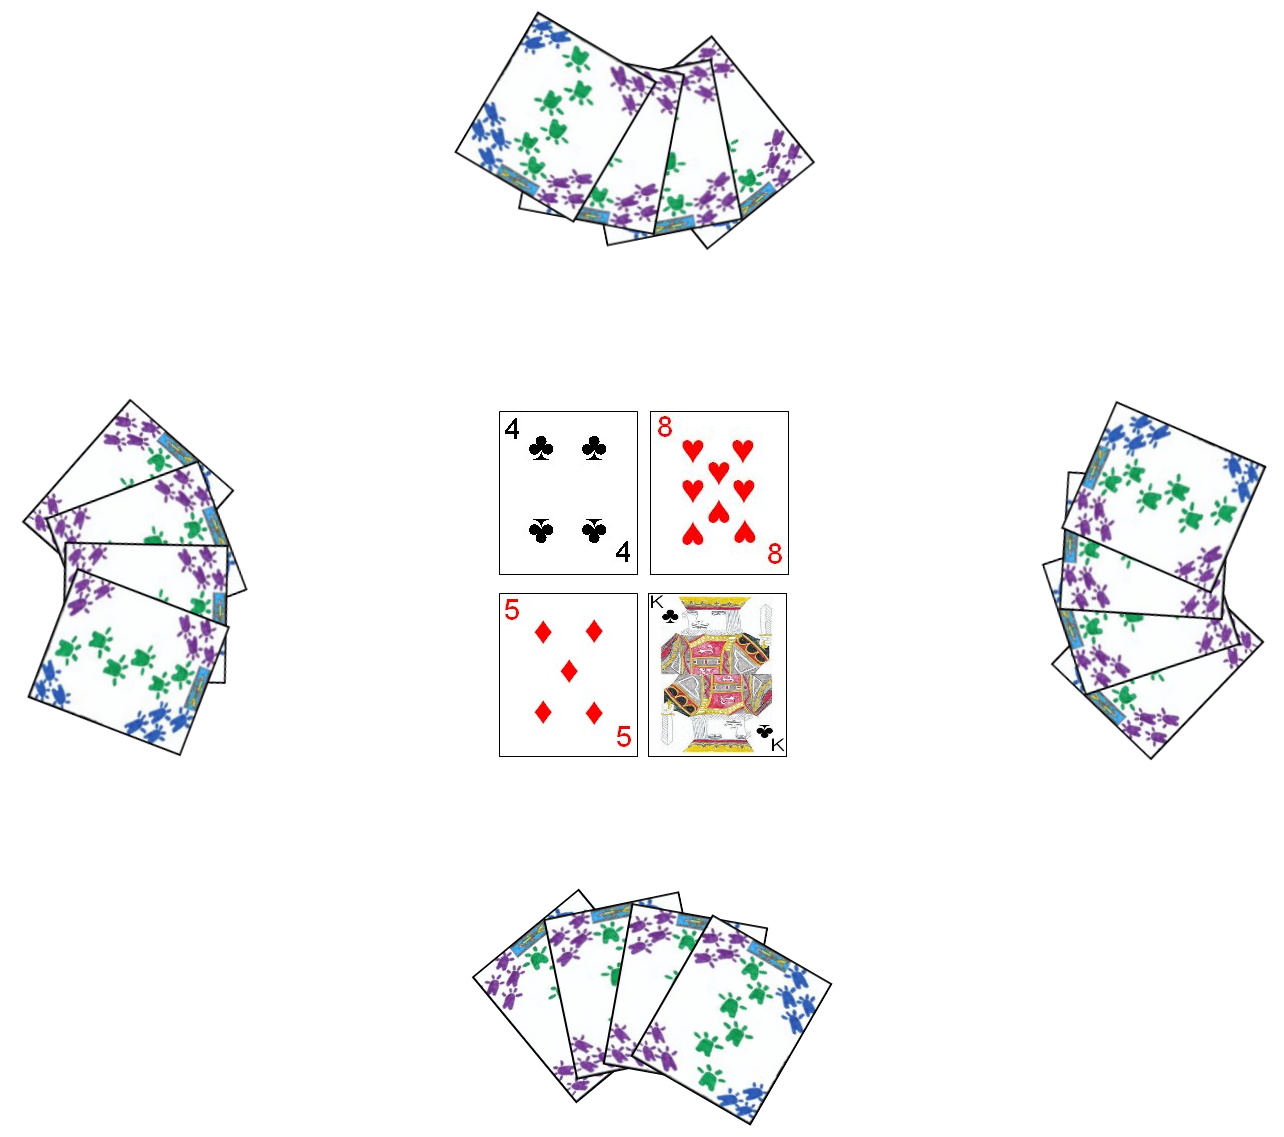 Example of initial setup in four player Partnership Cassino